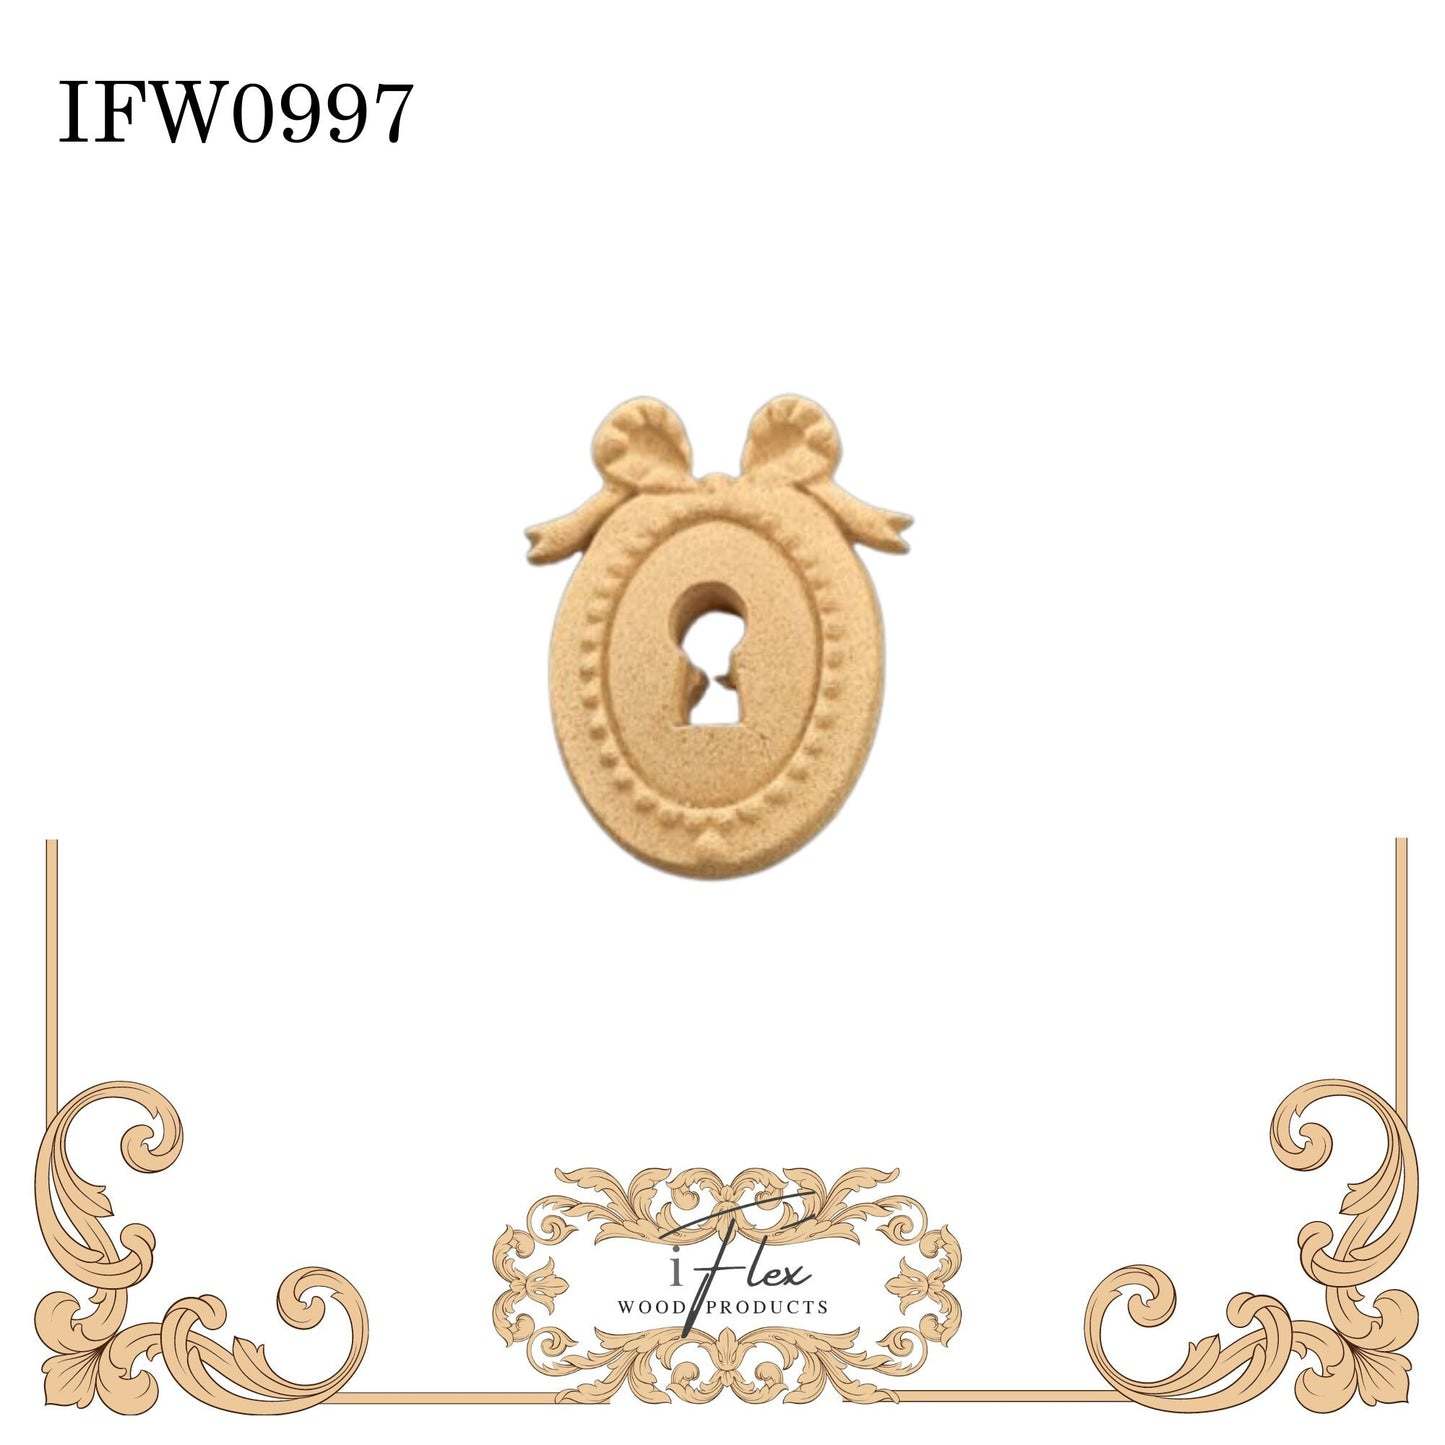 IFW 0997 iFlex Wood Products, bendable mouldings, flexible, wooden appliques, keyhole